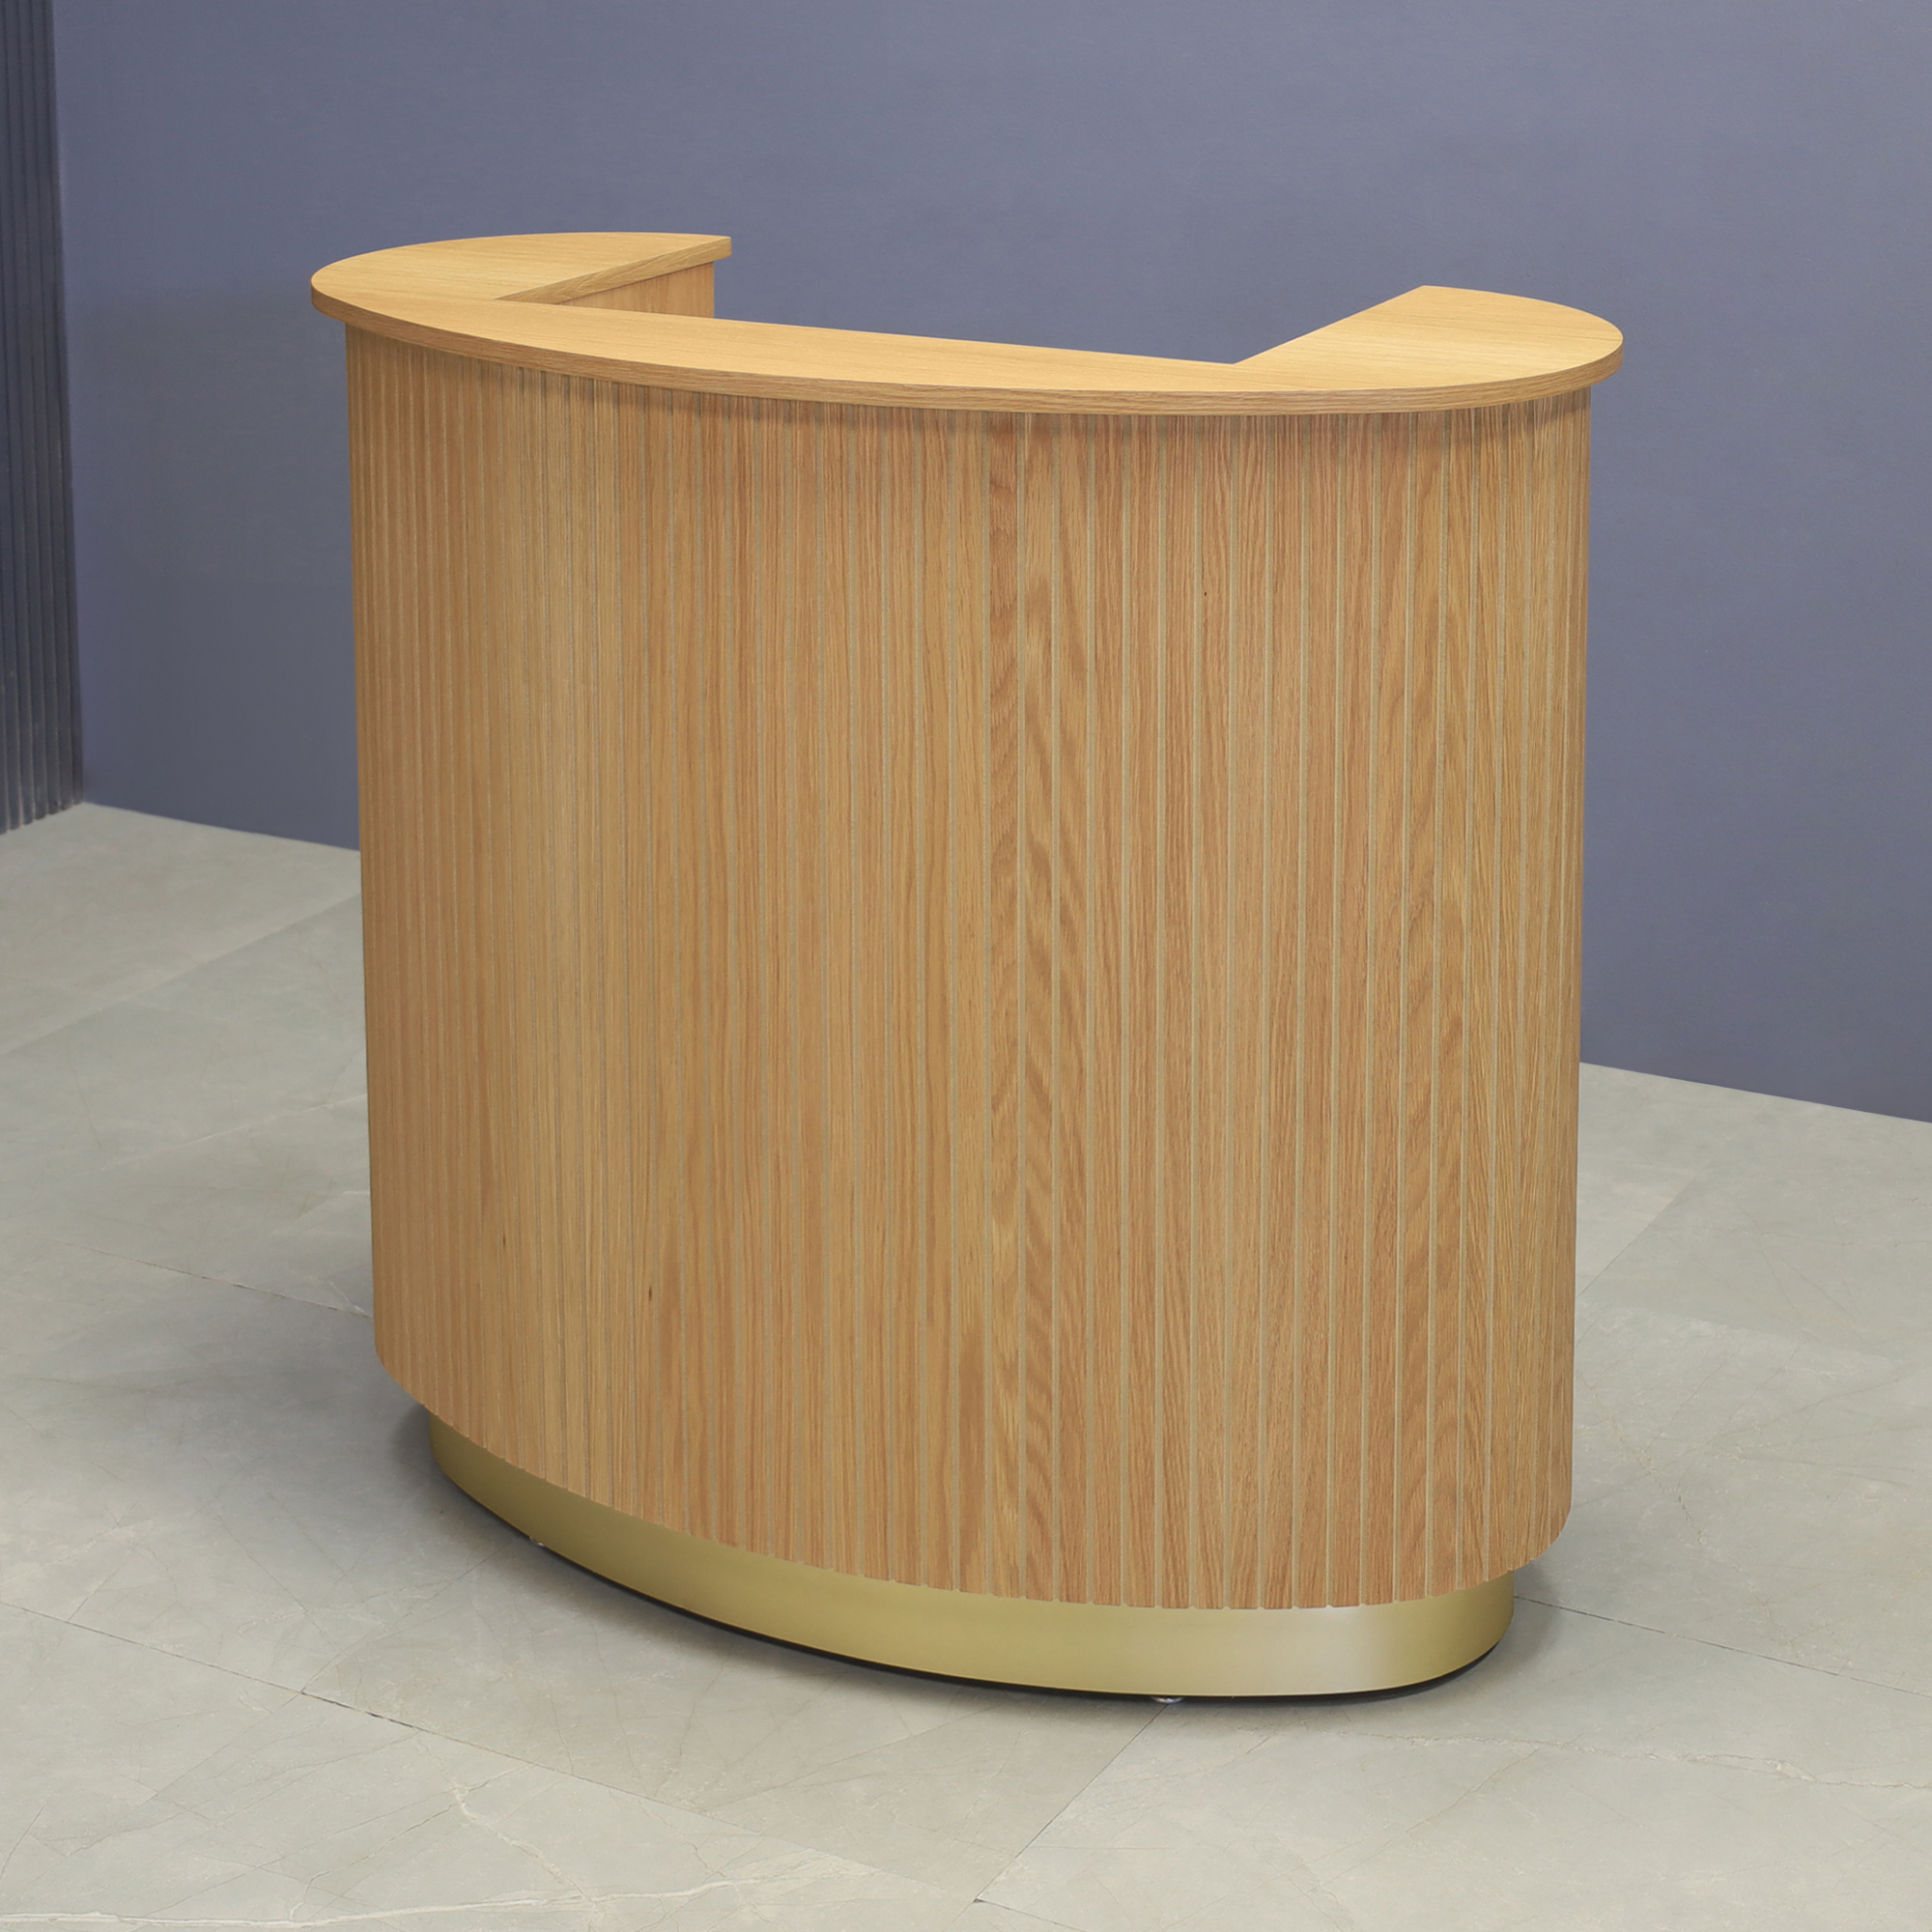 48-inch The Pill Podium & Host Custom Desk in white oak veneer top, front desk and workspace, with gold aluminum toe-kick, shown here.